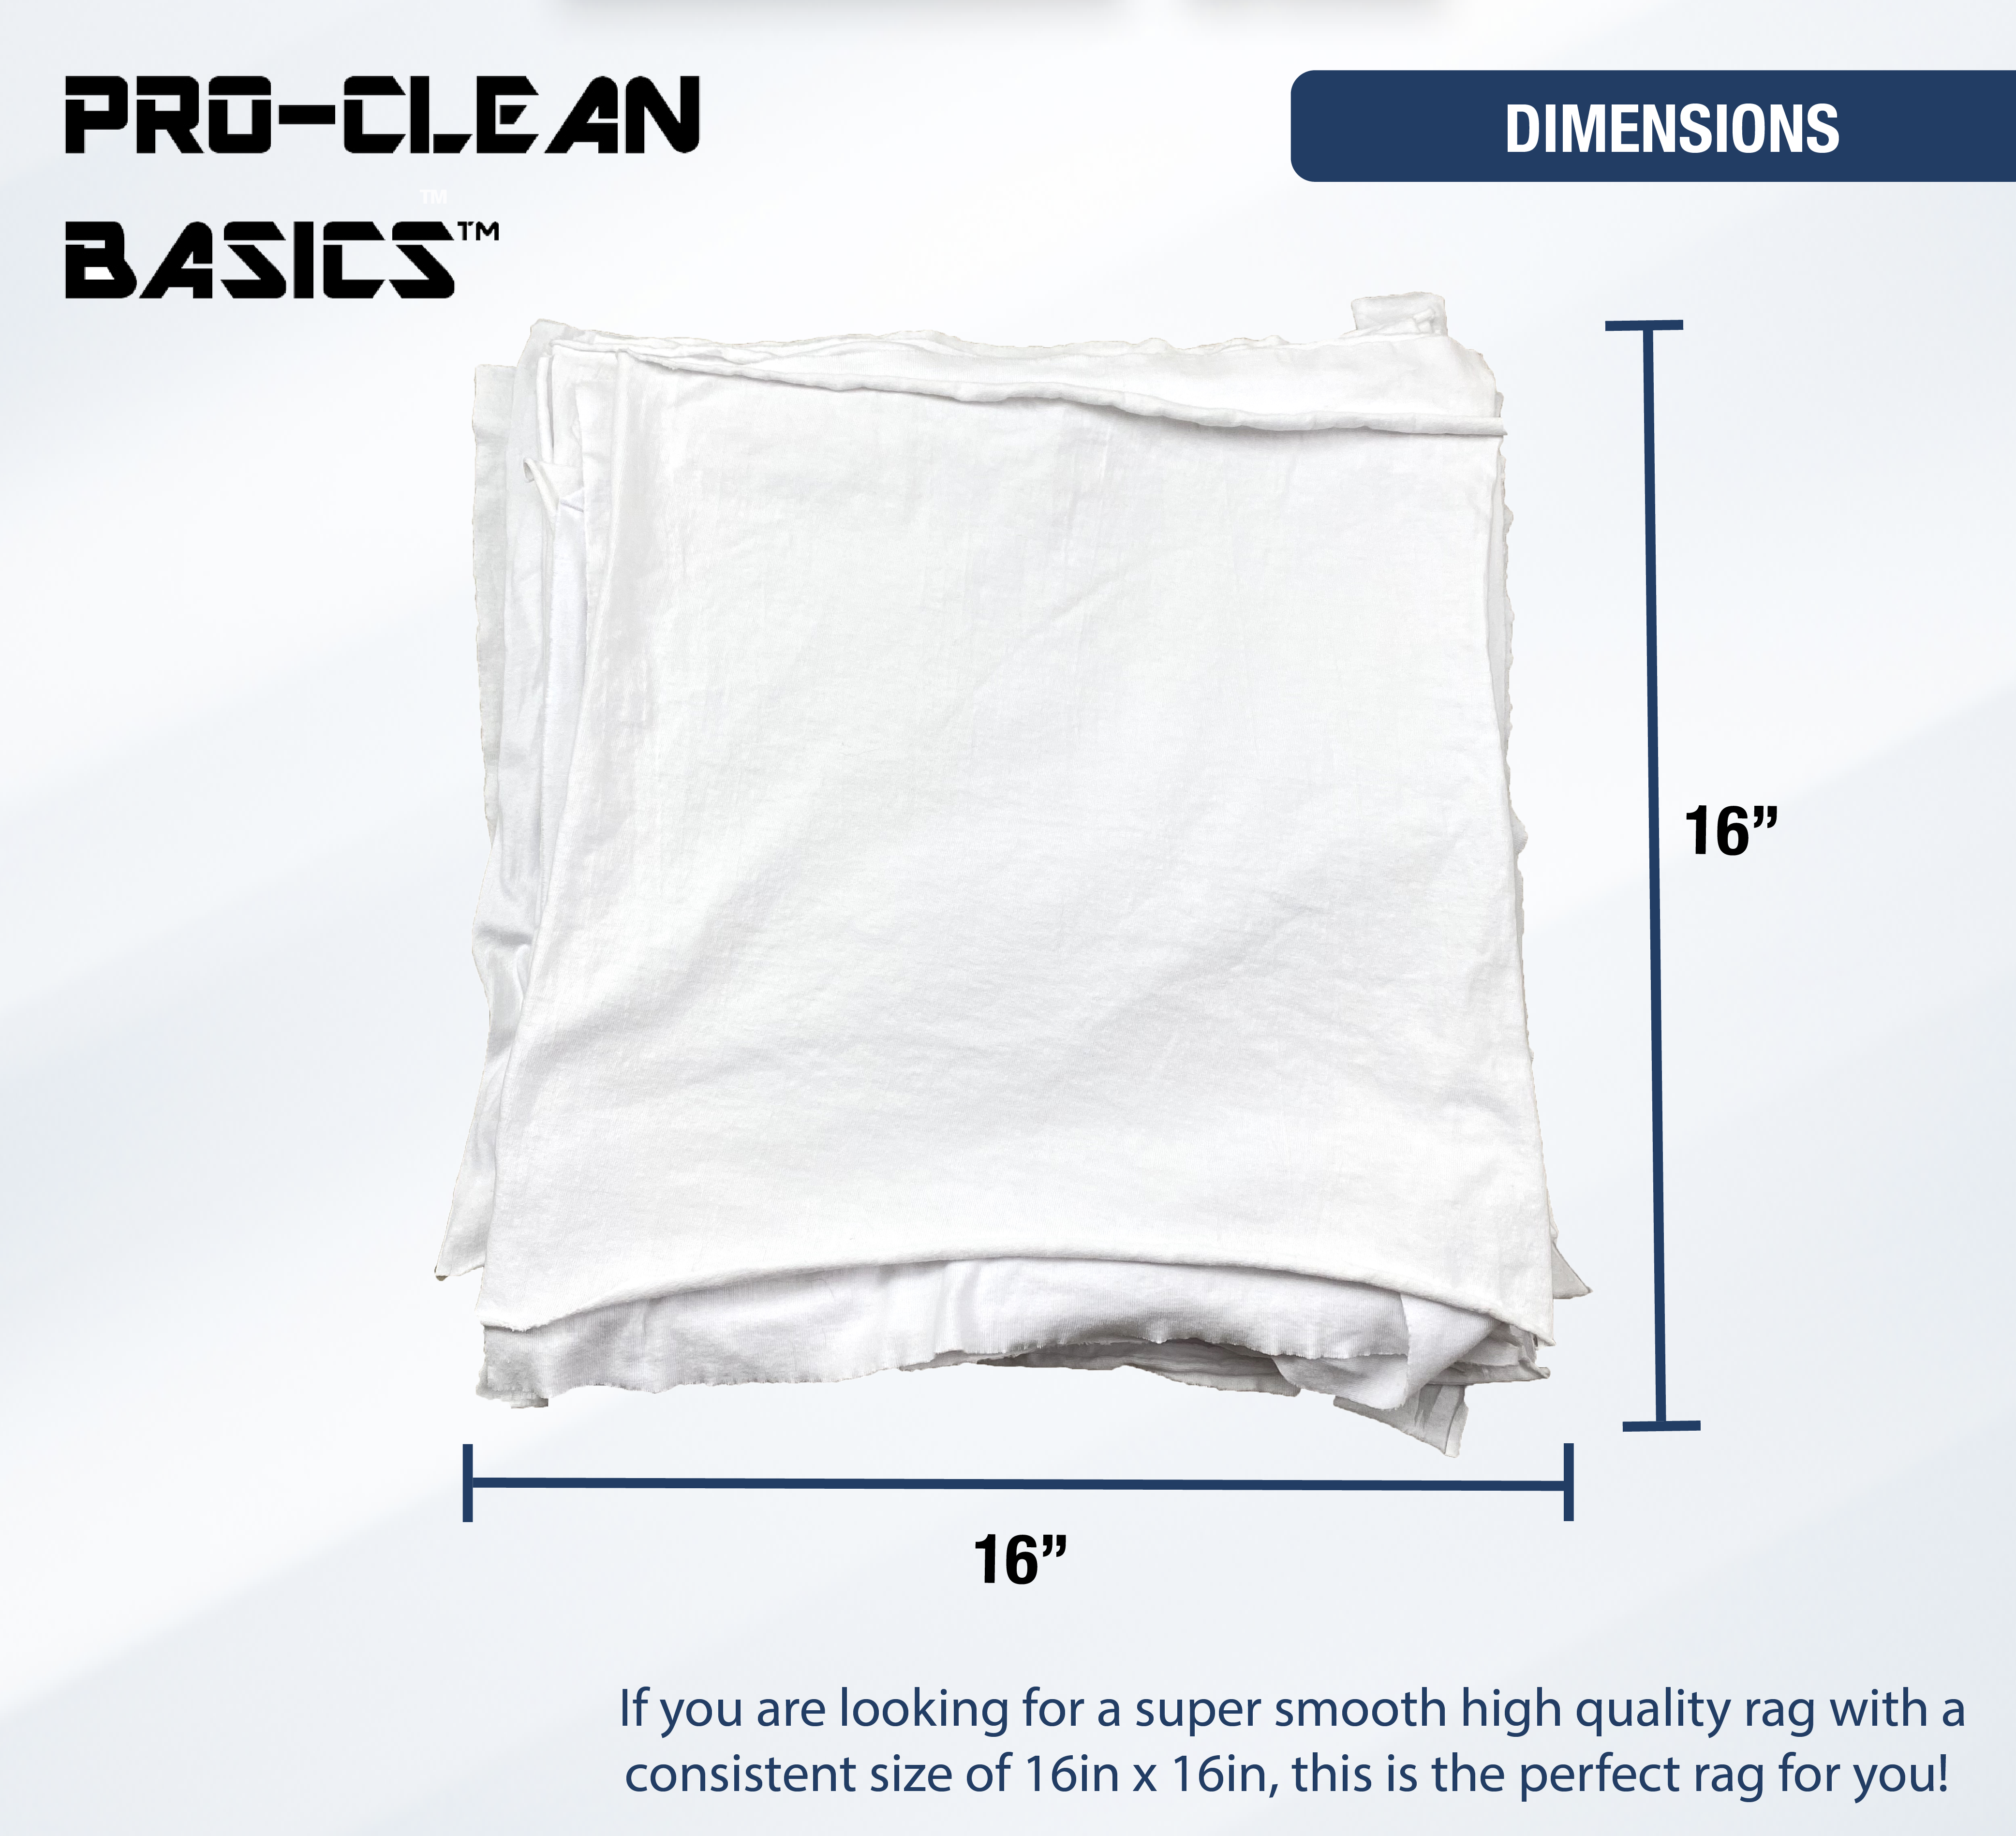 Pro-Clean Basics Premium Supreme: Smooth Jersey Die Cut 16in x 16in White T-Shirt Rags